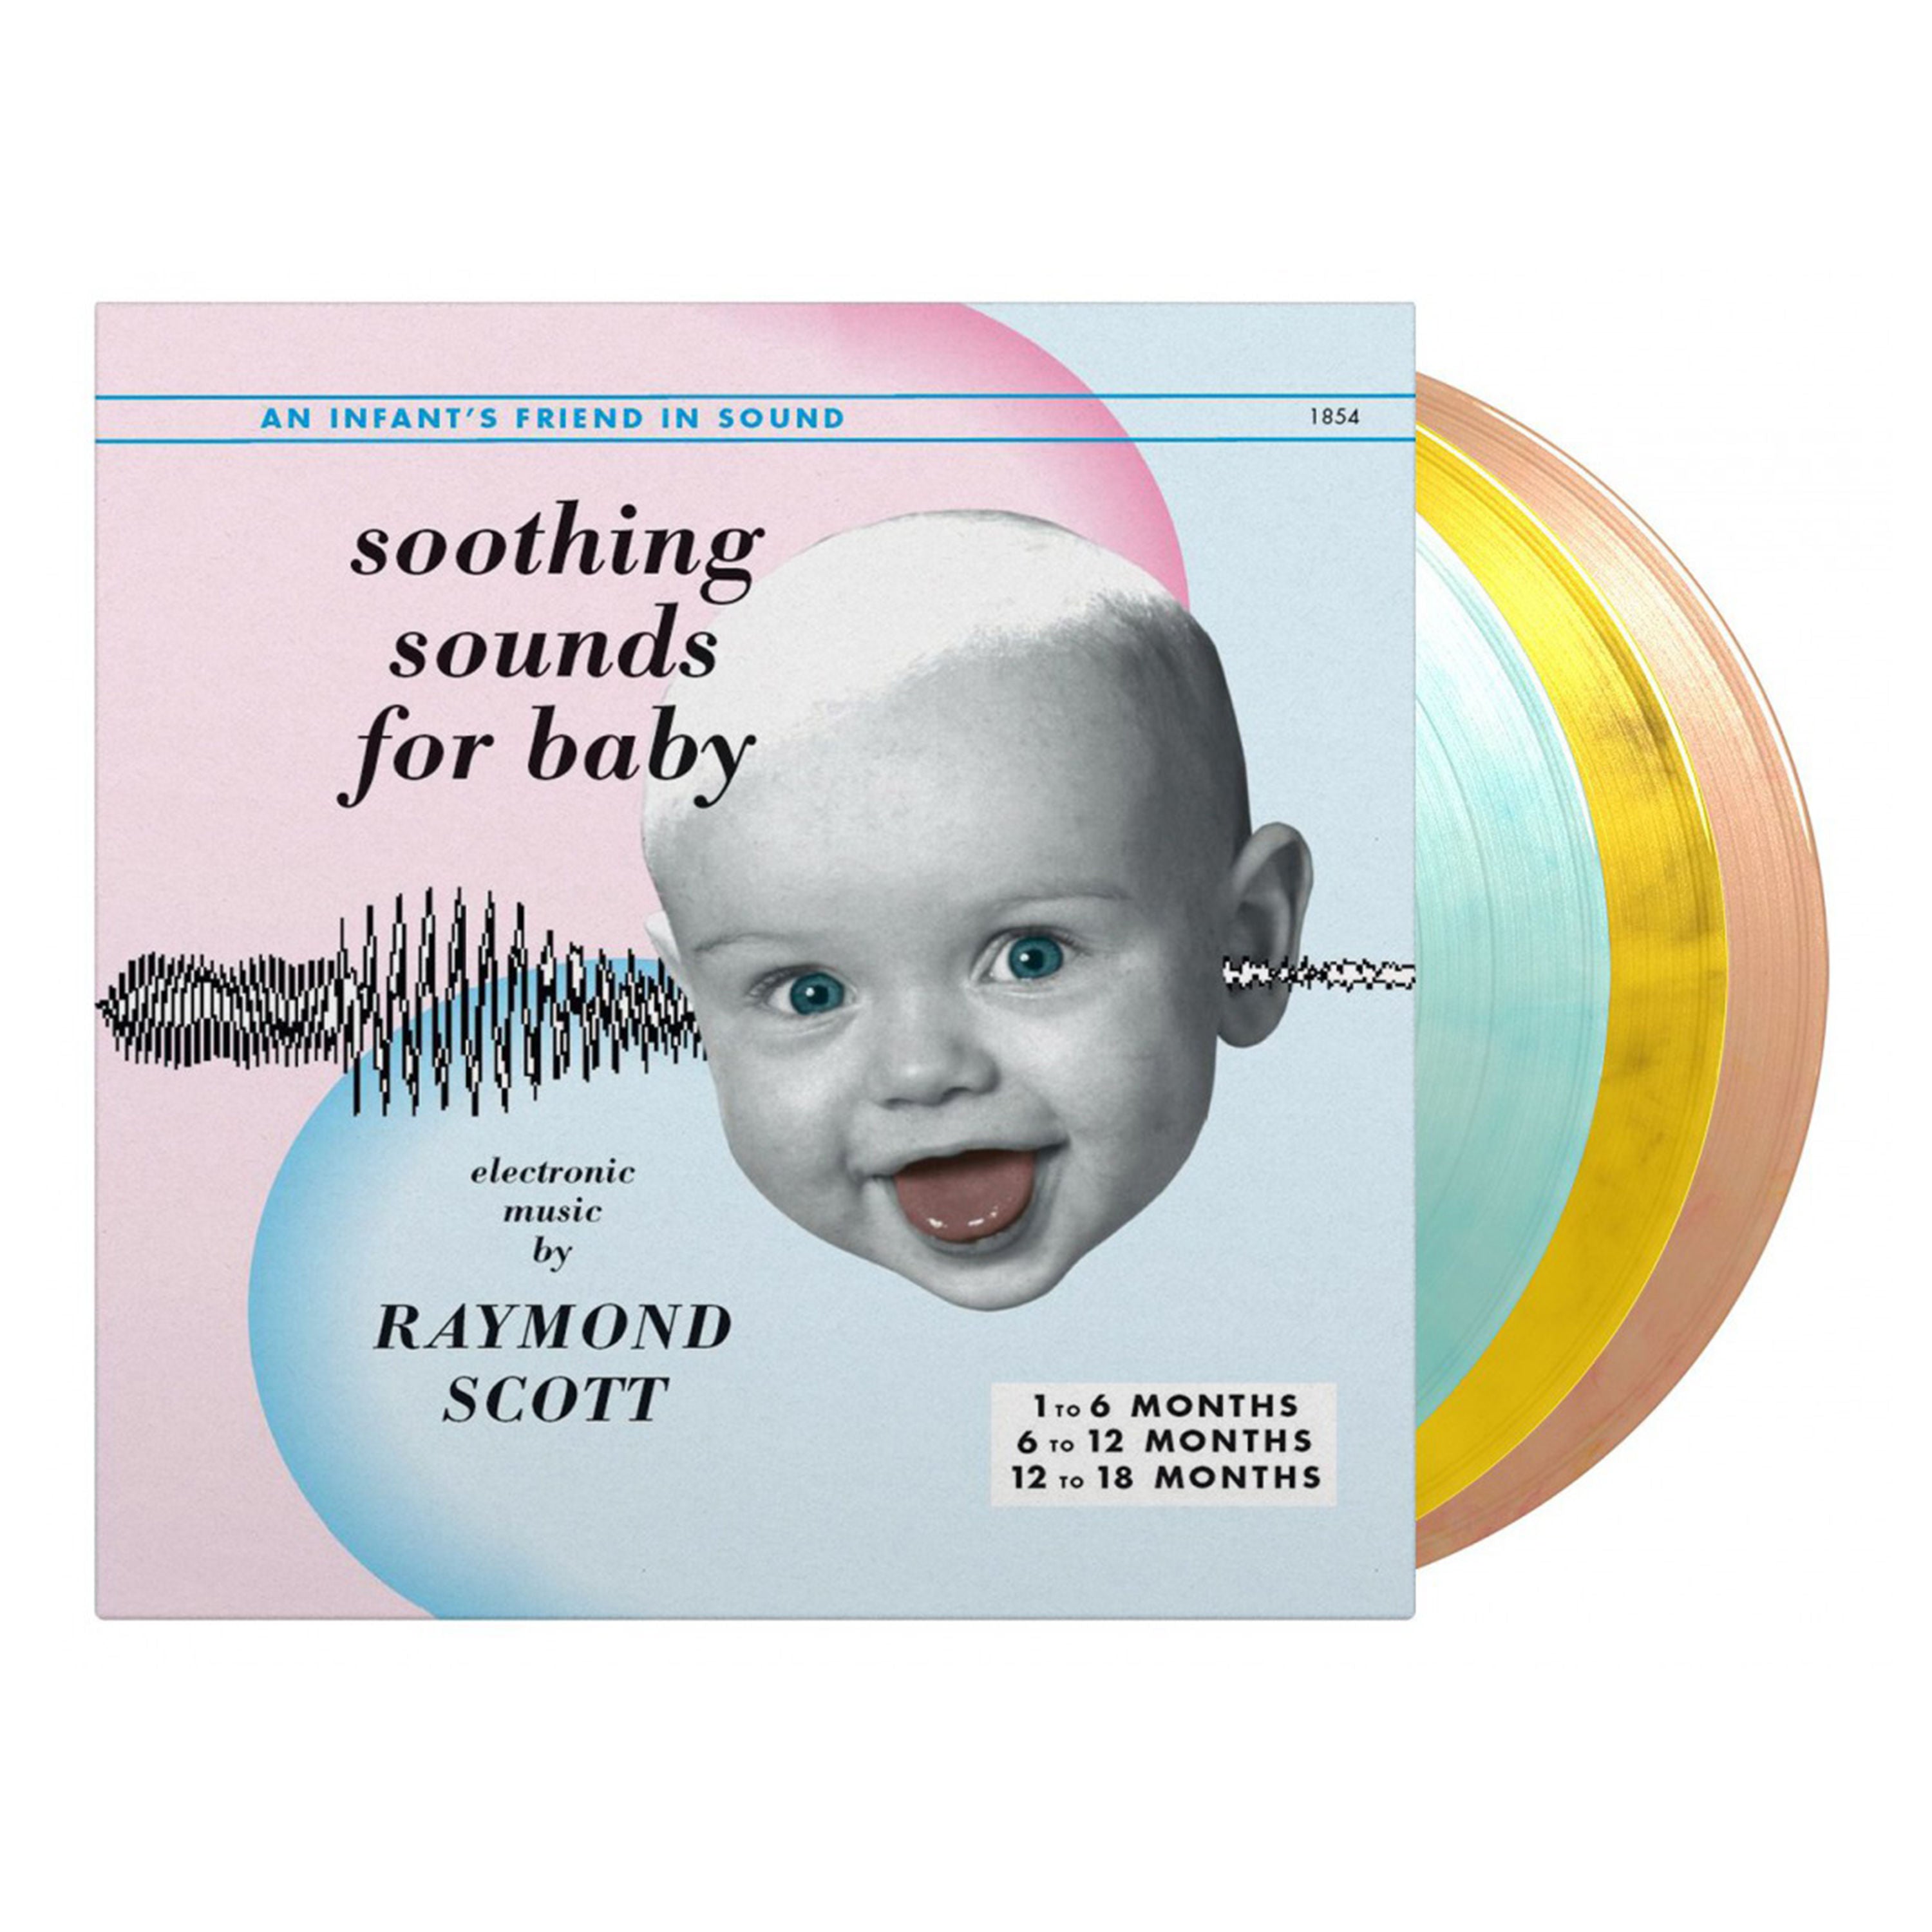 Soothing Sounds for Baby: Limited Orange, Yellow + Light Blue Marbled Vinyl 3LP